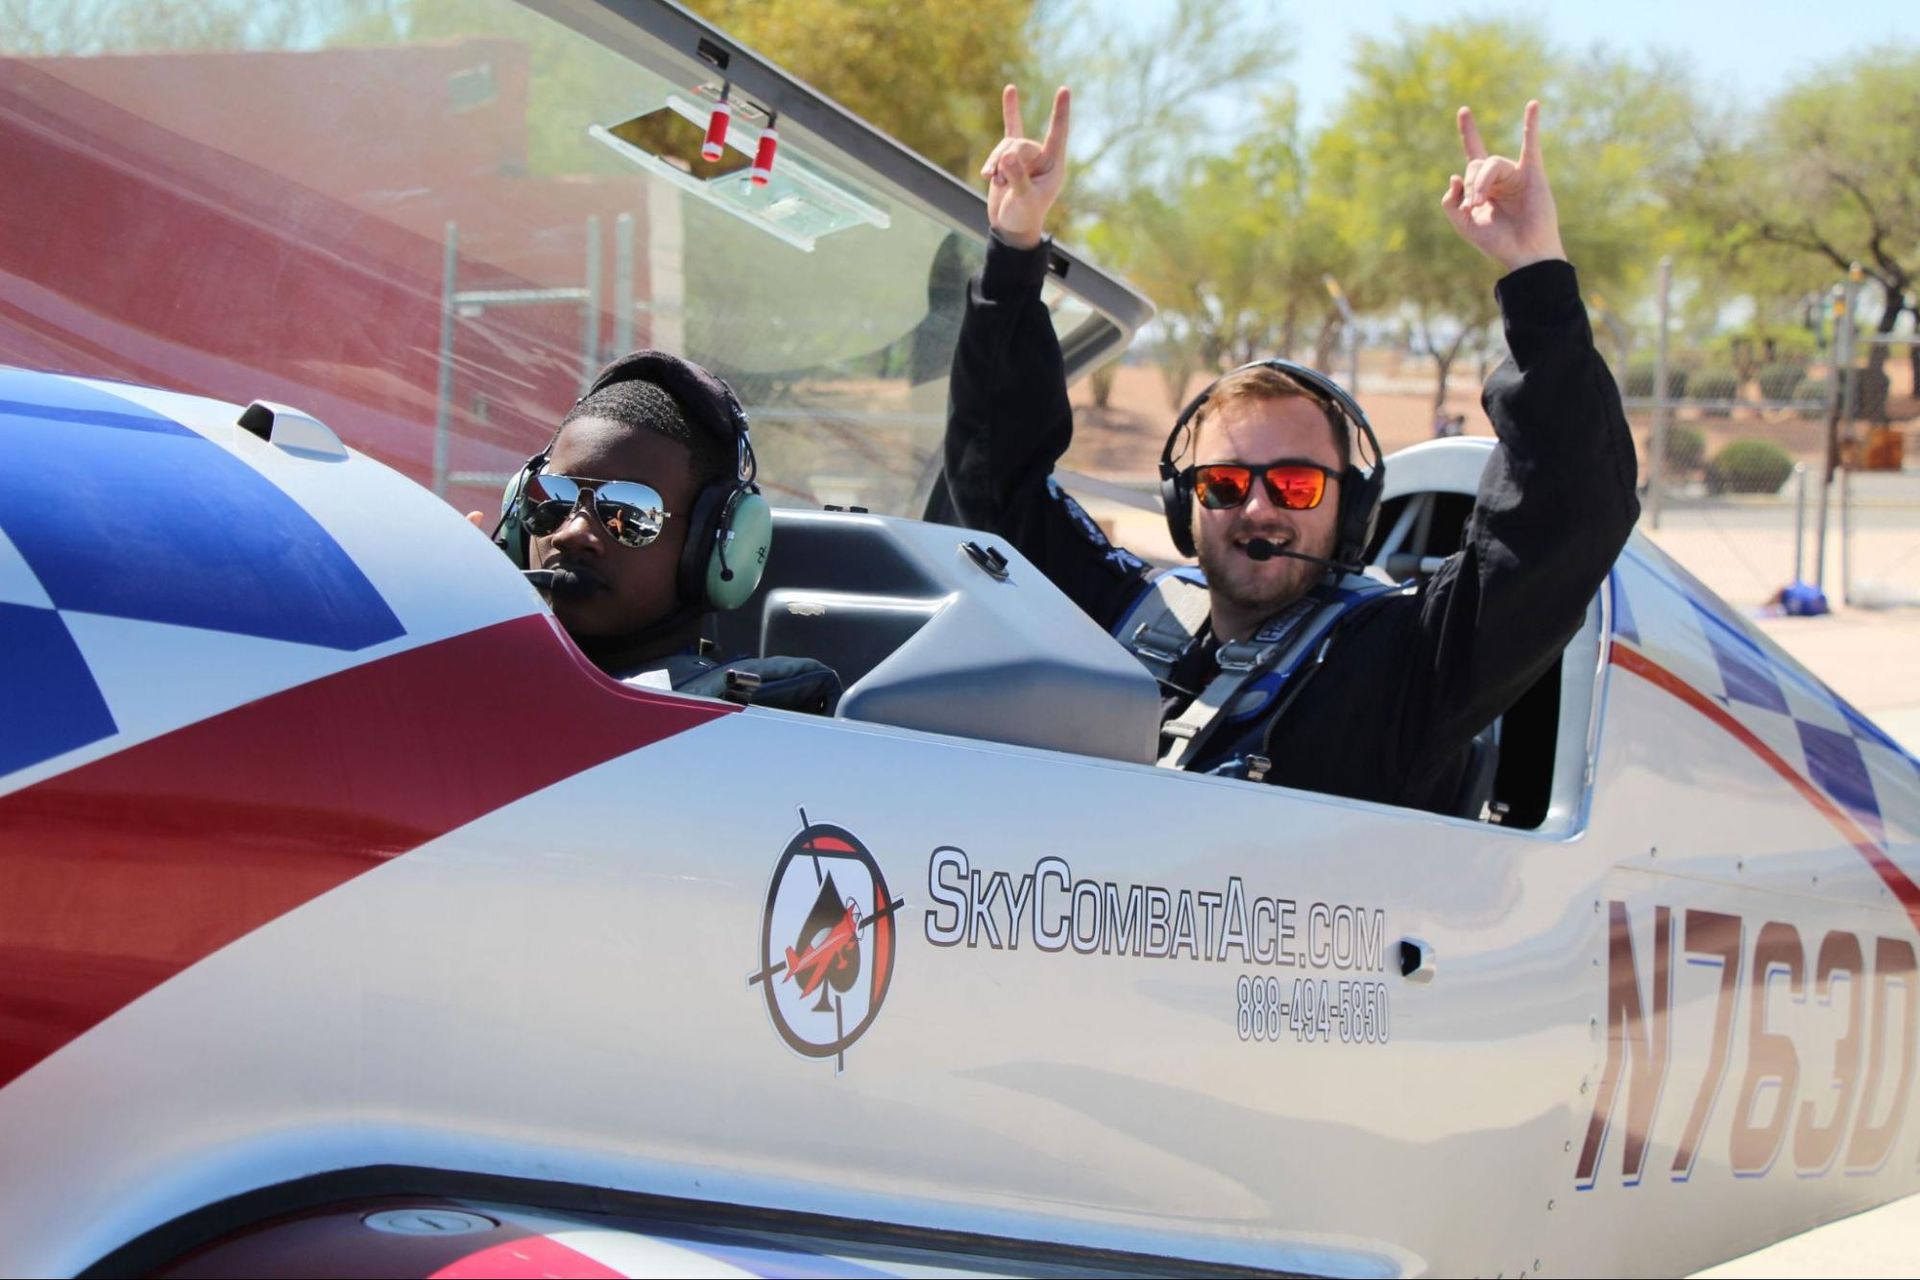 A man with his flight instructor inside a Sky Combat Ace airplane, one of Las Vegas' extreme activities.